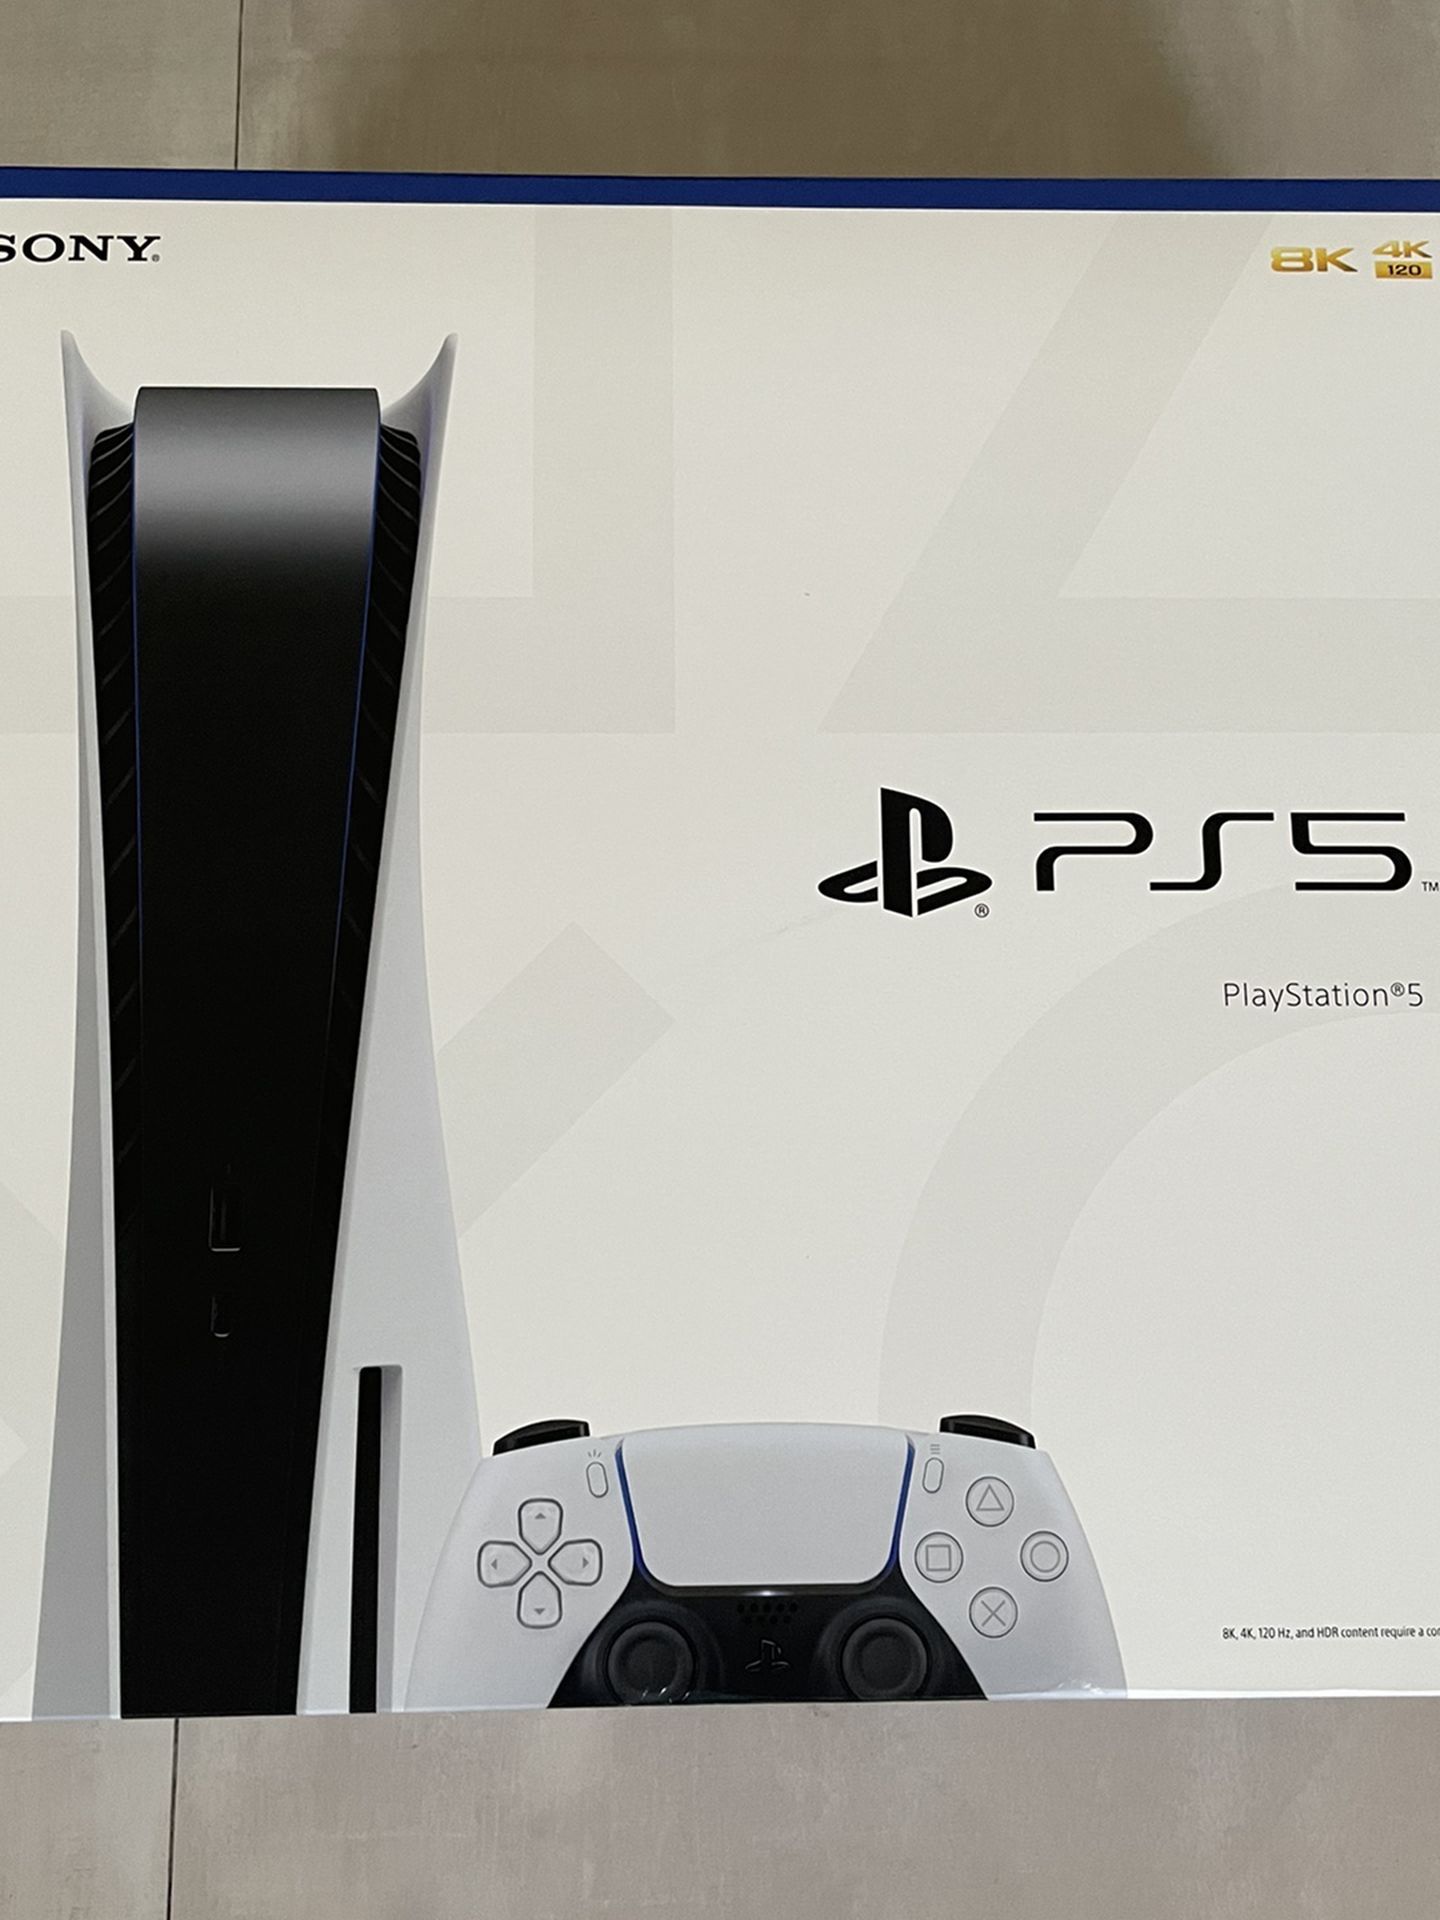 Brand New Playstation 5 Console Disc Version With Proof Of Purchase 900 OBO Negotiable!